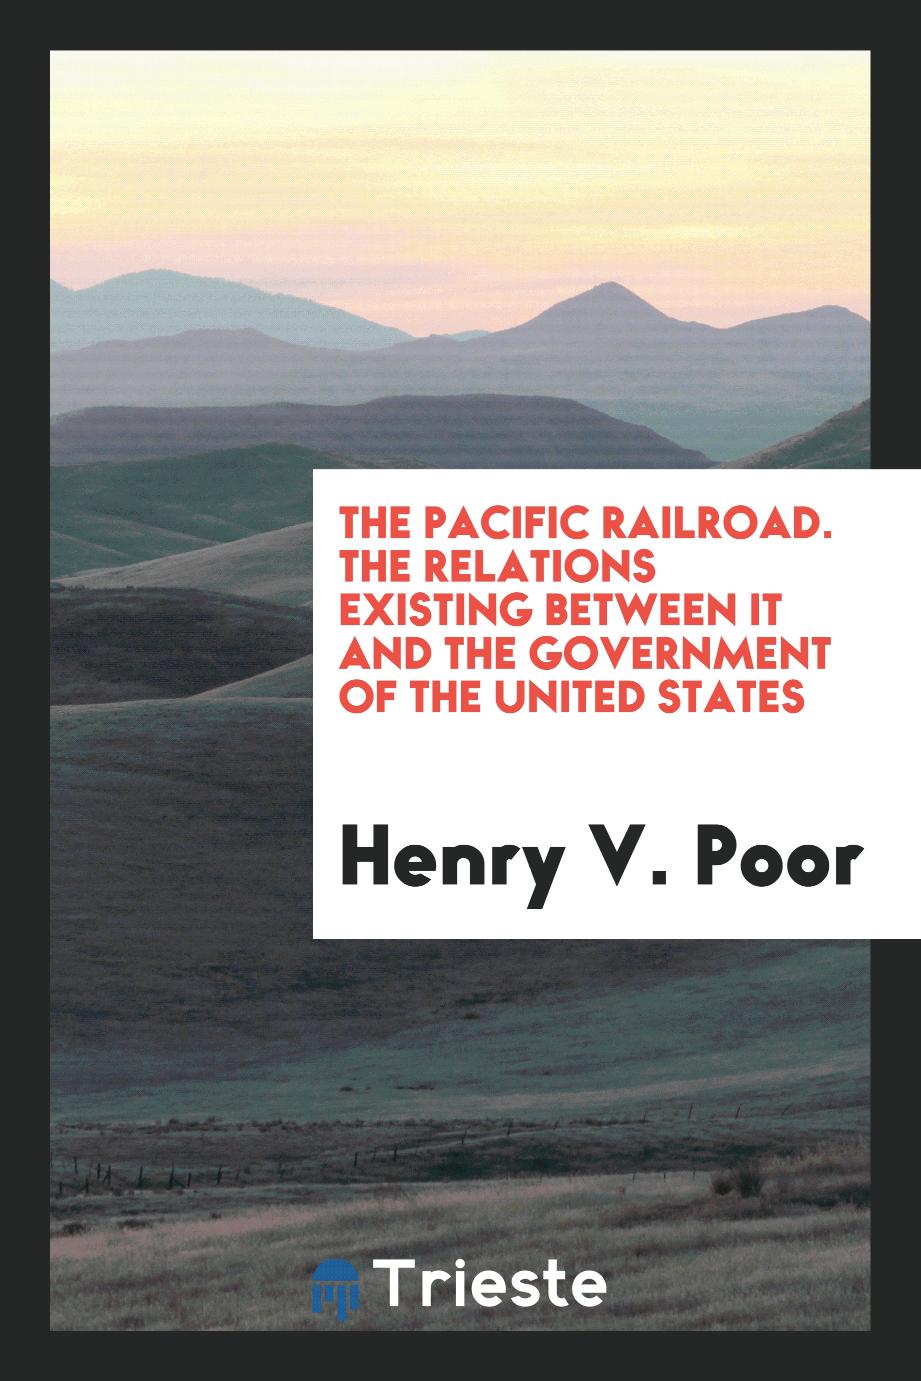 The Pacific Railroad. The Relations Existing Between it and the Government of the United States